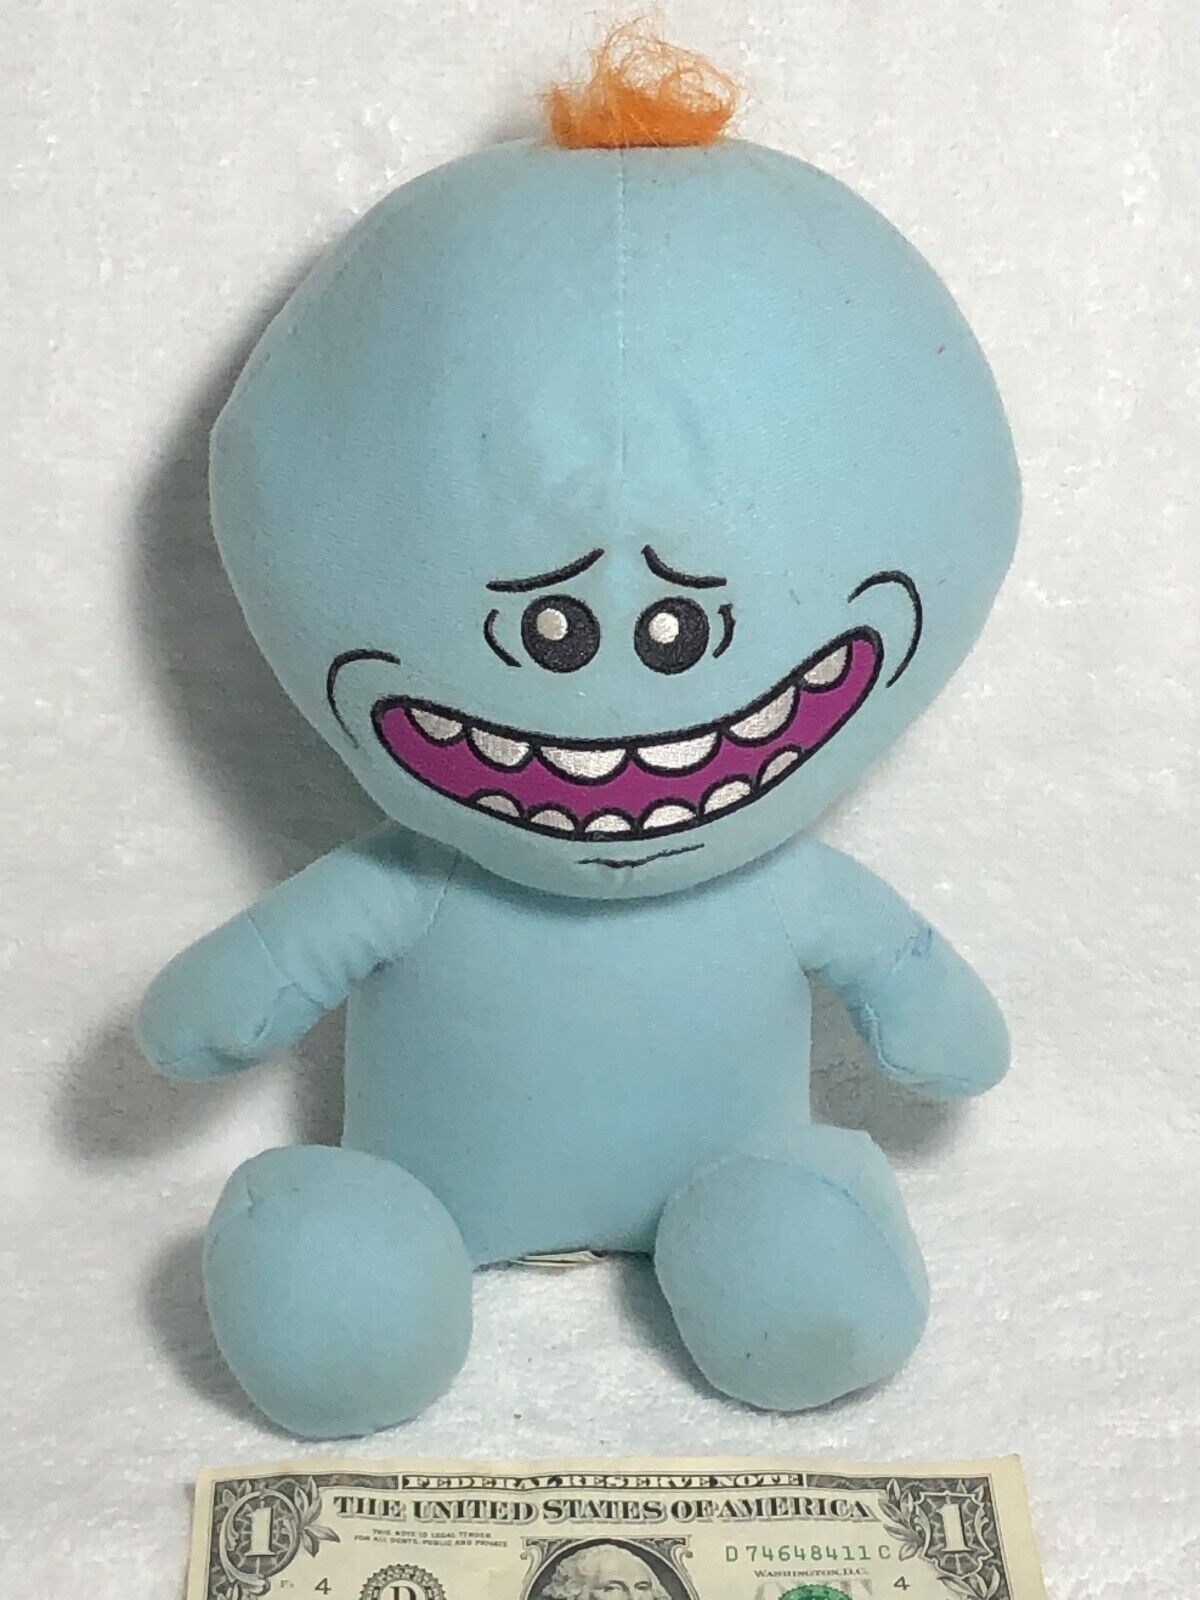 Cute Rick & Morty Mr. Meeseeks Plush Baby Blue Doll Adult Swim 2018 Toy Factory!